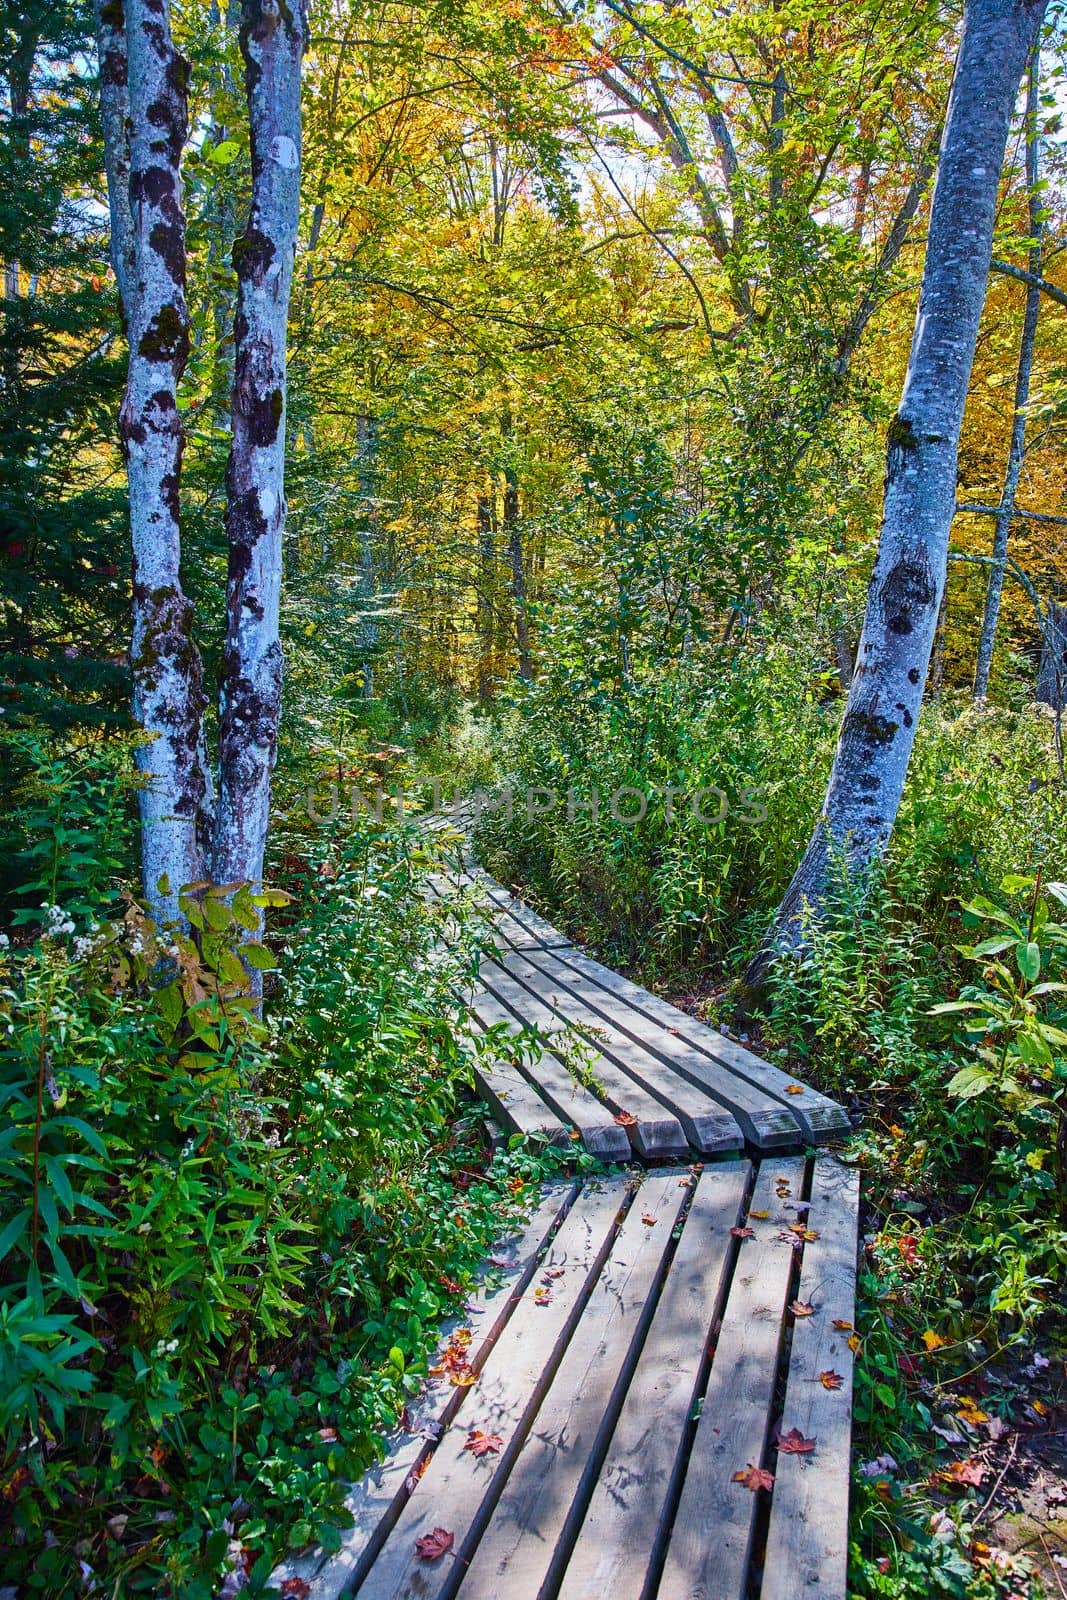 Image of Park narrow boardwalk path through woods with tree trunks